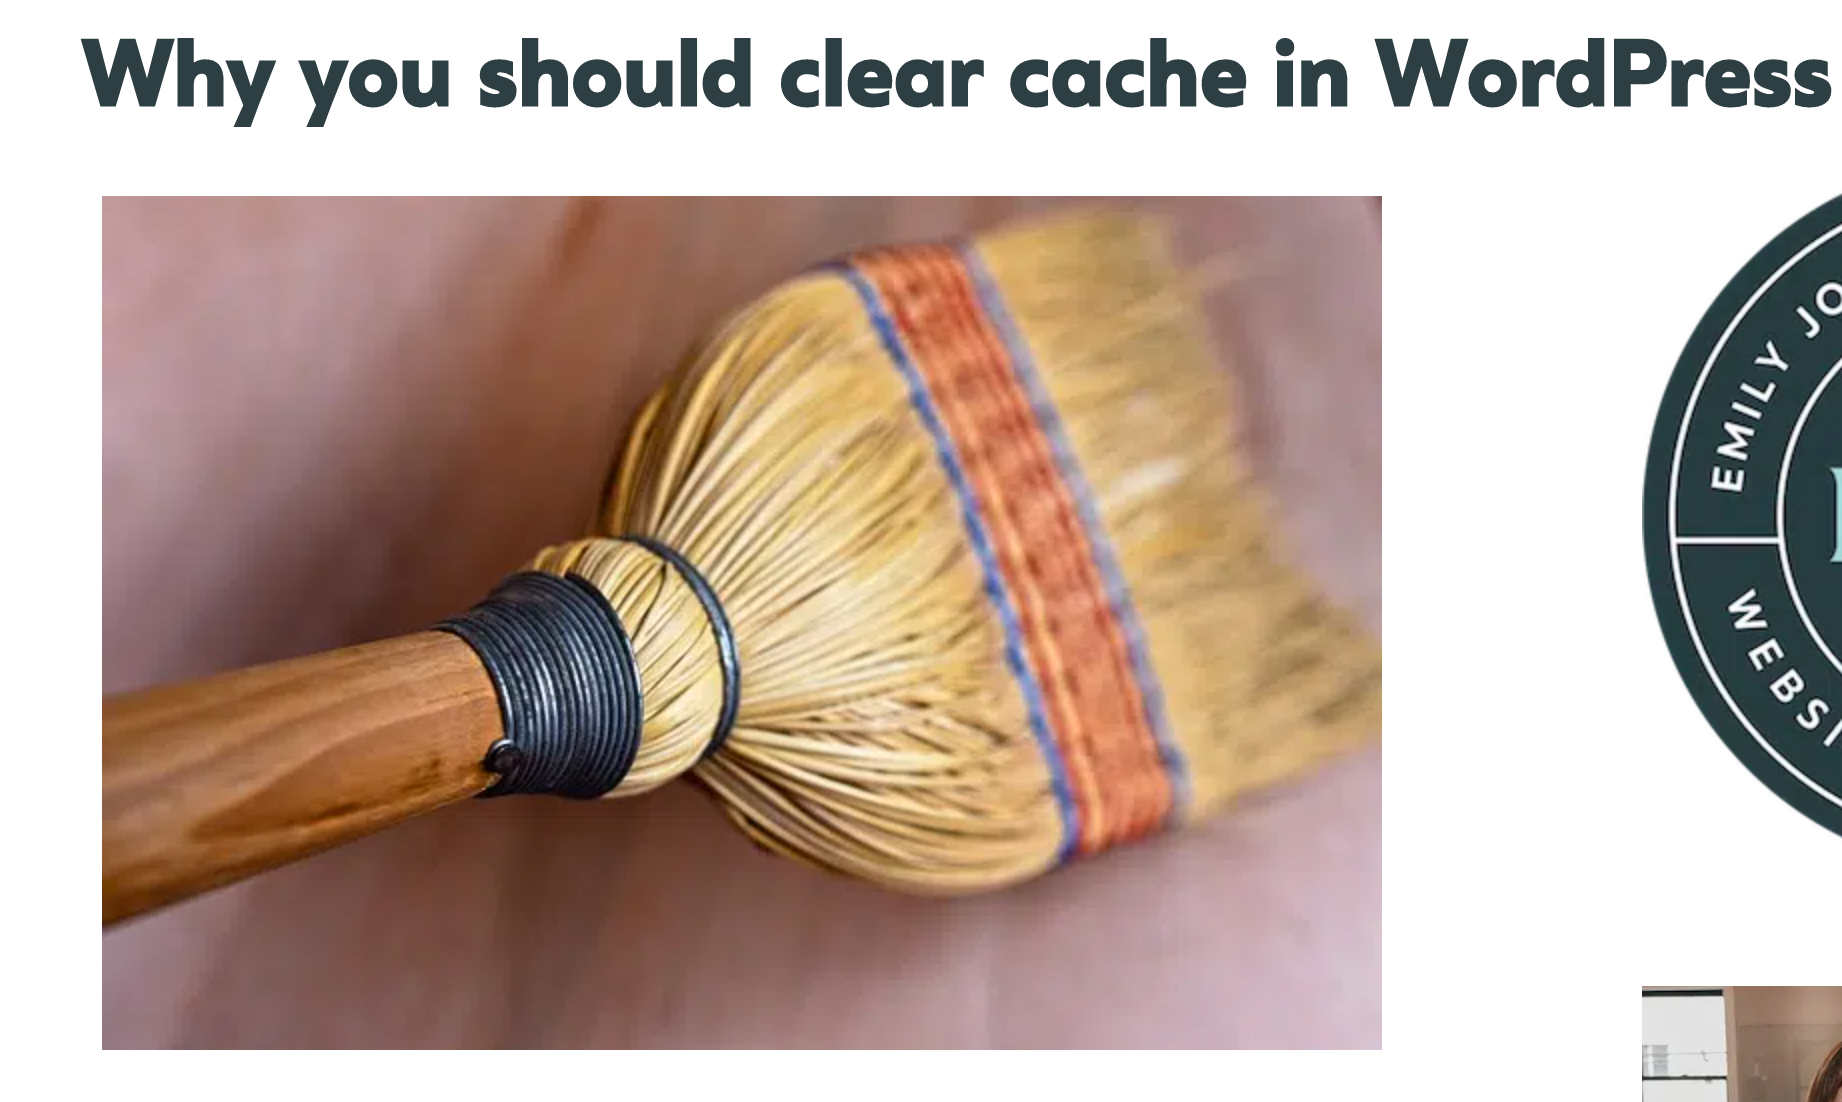 Why You Should Clear Cache in WordPress